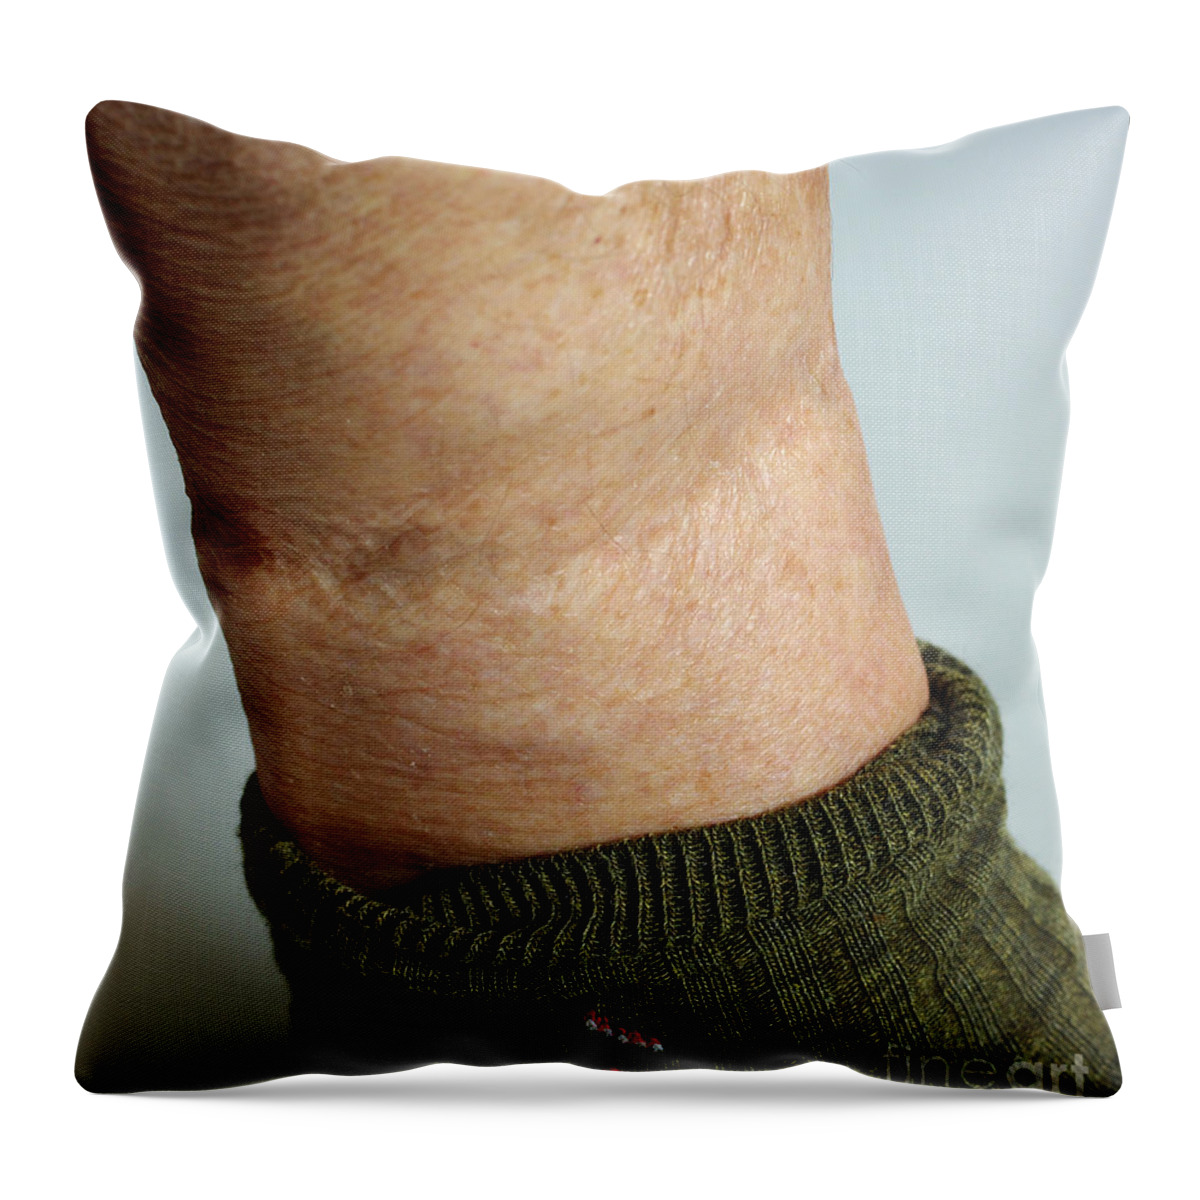 Socks Throw Pillow featuring the photograph Elastic In Socks Impairs Blood Flow #2 by Scimat